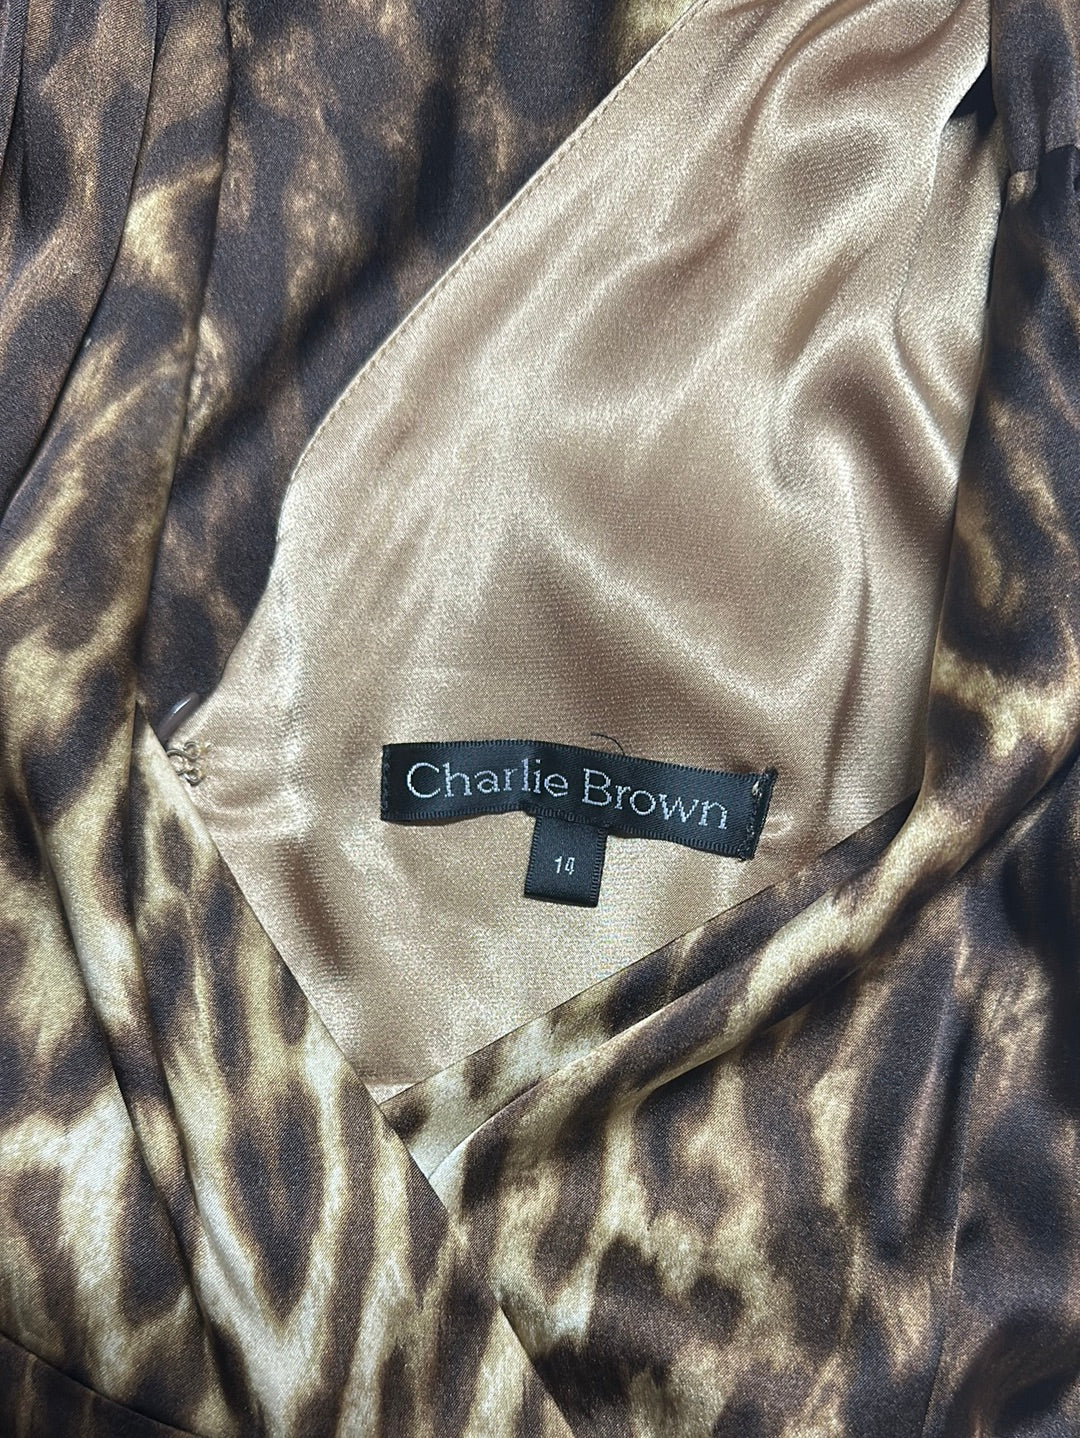 Charile Brown | vintage 90's | dress | size 14 | knee length | made in Australia